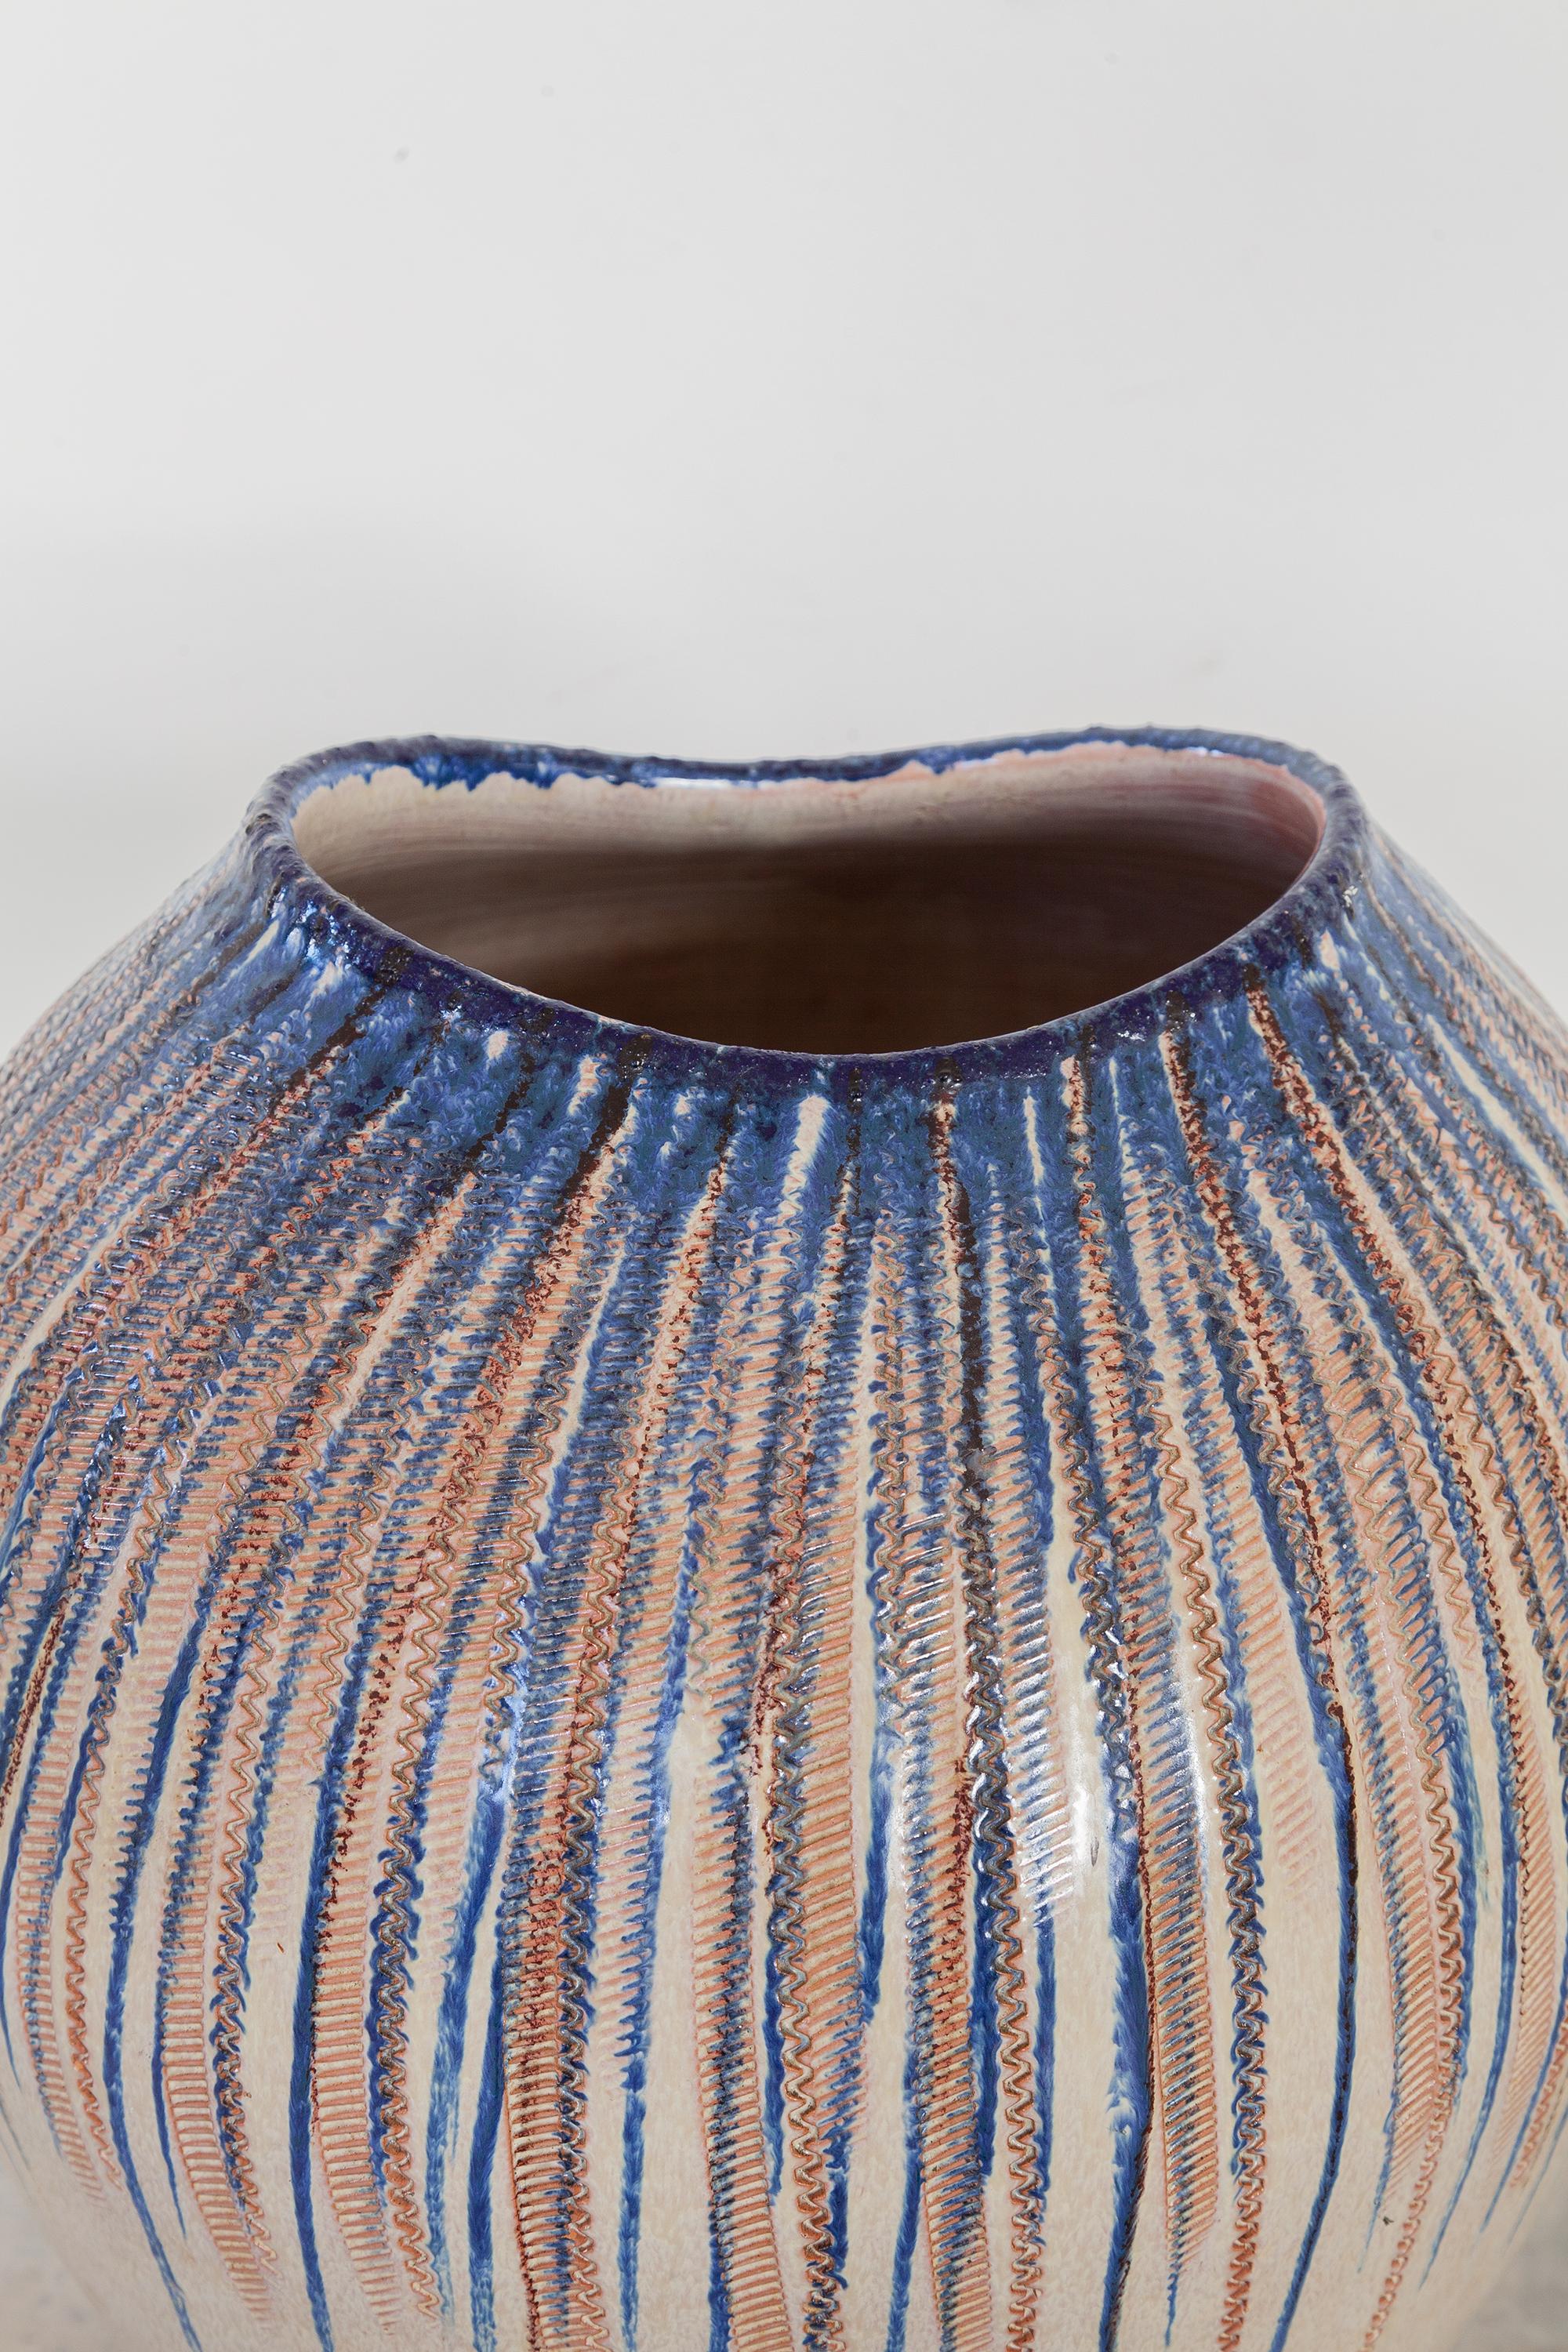 Mid-20th Century Large Stoneware Art Pottery Vase, Germany, 1960s For Sale